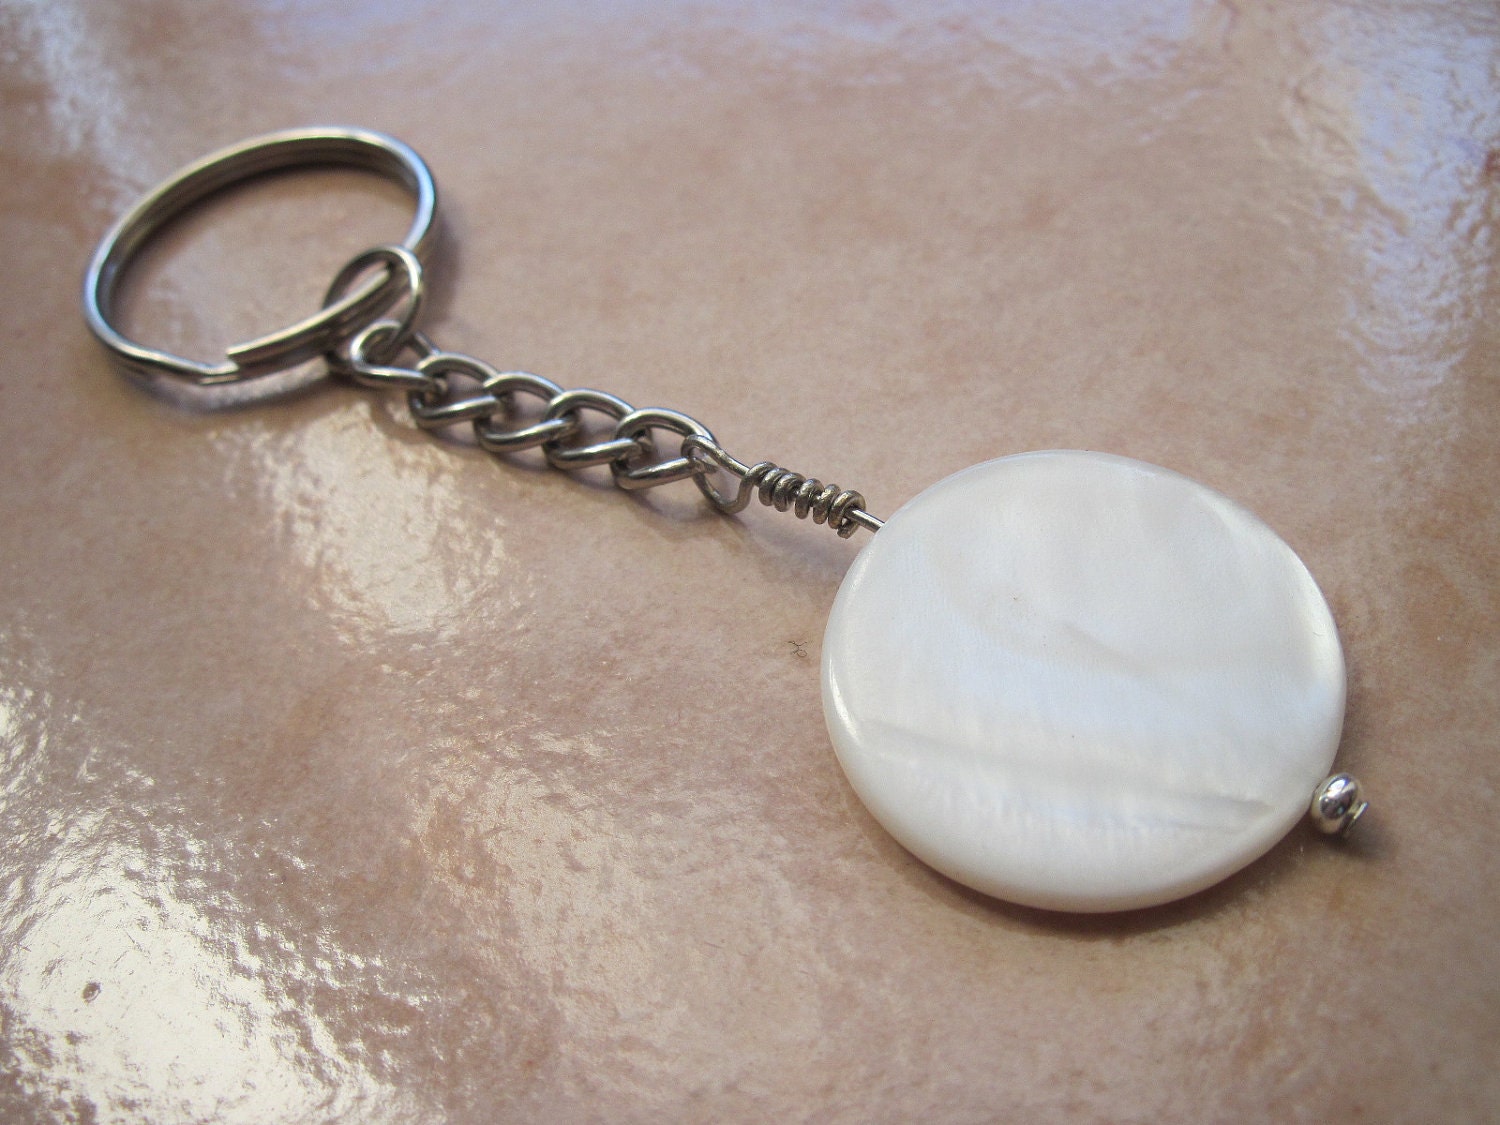 Men key chain, pure white Mother of pearl disk woman keychain, gift for him under 15 valentines day